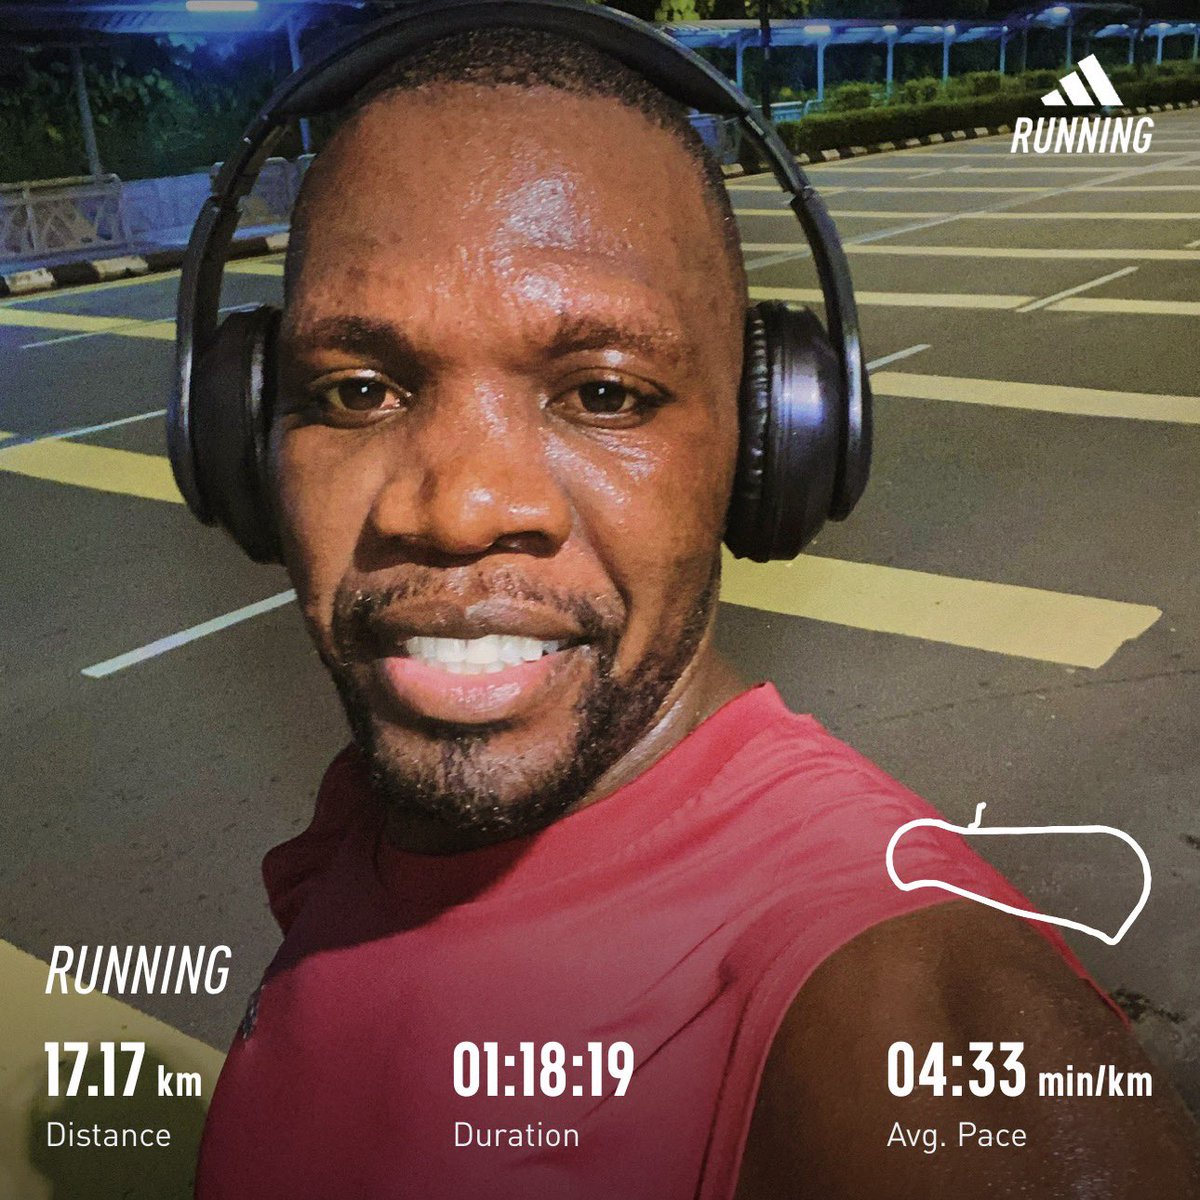 Switching your mindset from 'I hope I can do this' to 'I'm going to make this shit happen' is a real game changer.
#RunningWithSoleA
#runningwithtumisole
#runwitharthurk
#nikerunning
#adidasruntastic
#runaddicted 
#halfmarathon
#IPaintedMyRun 
#RunningWithLulubel
#Run2024…